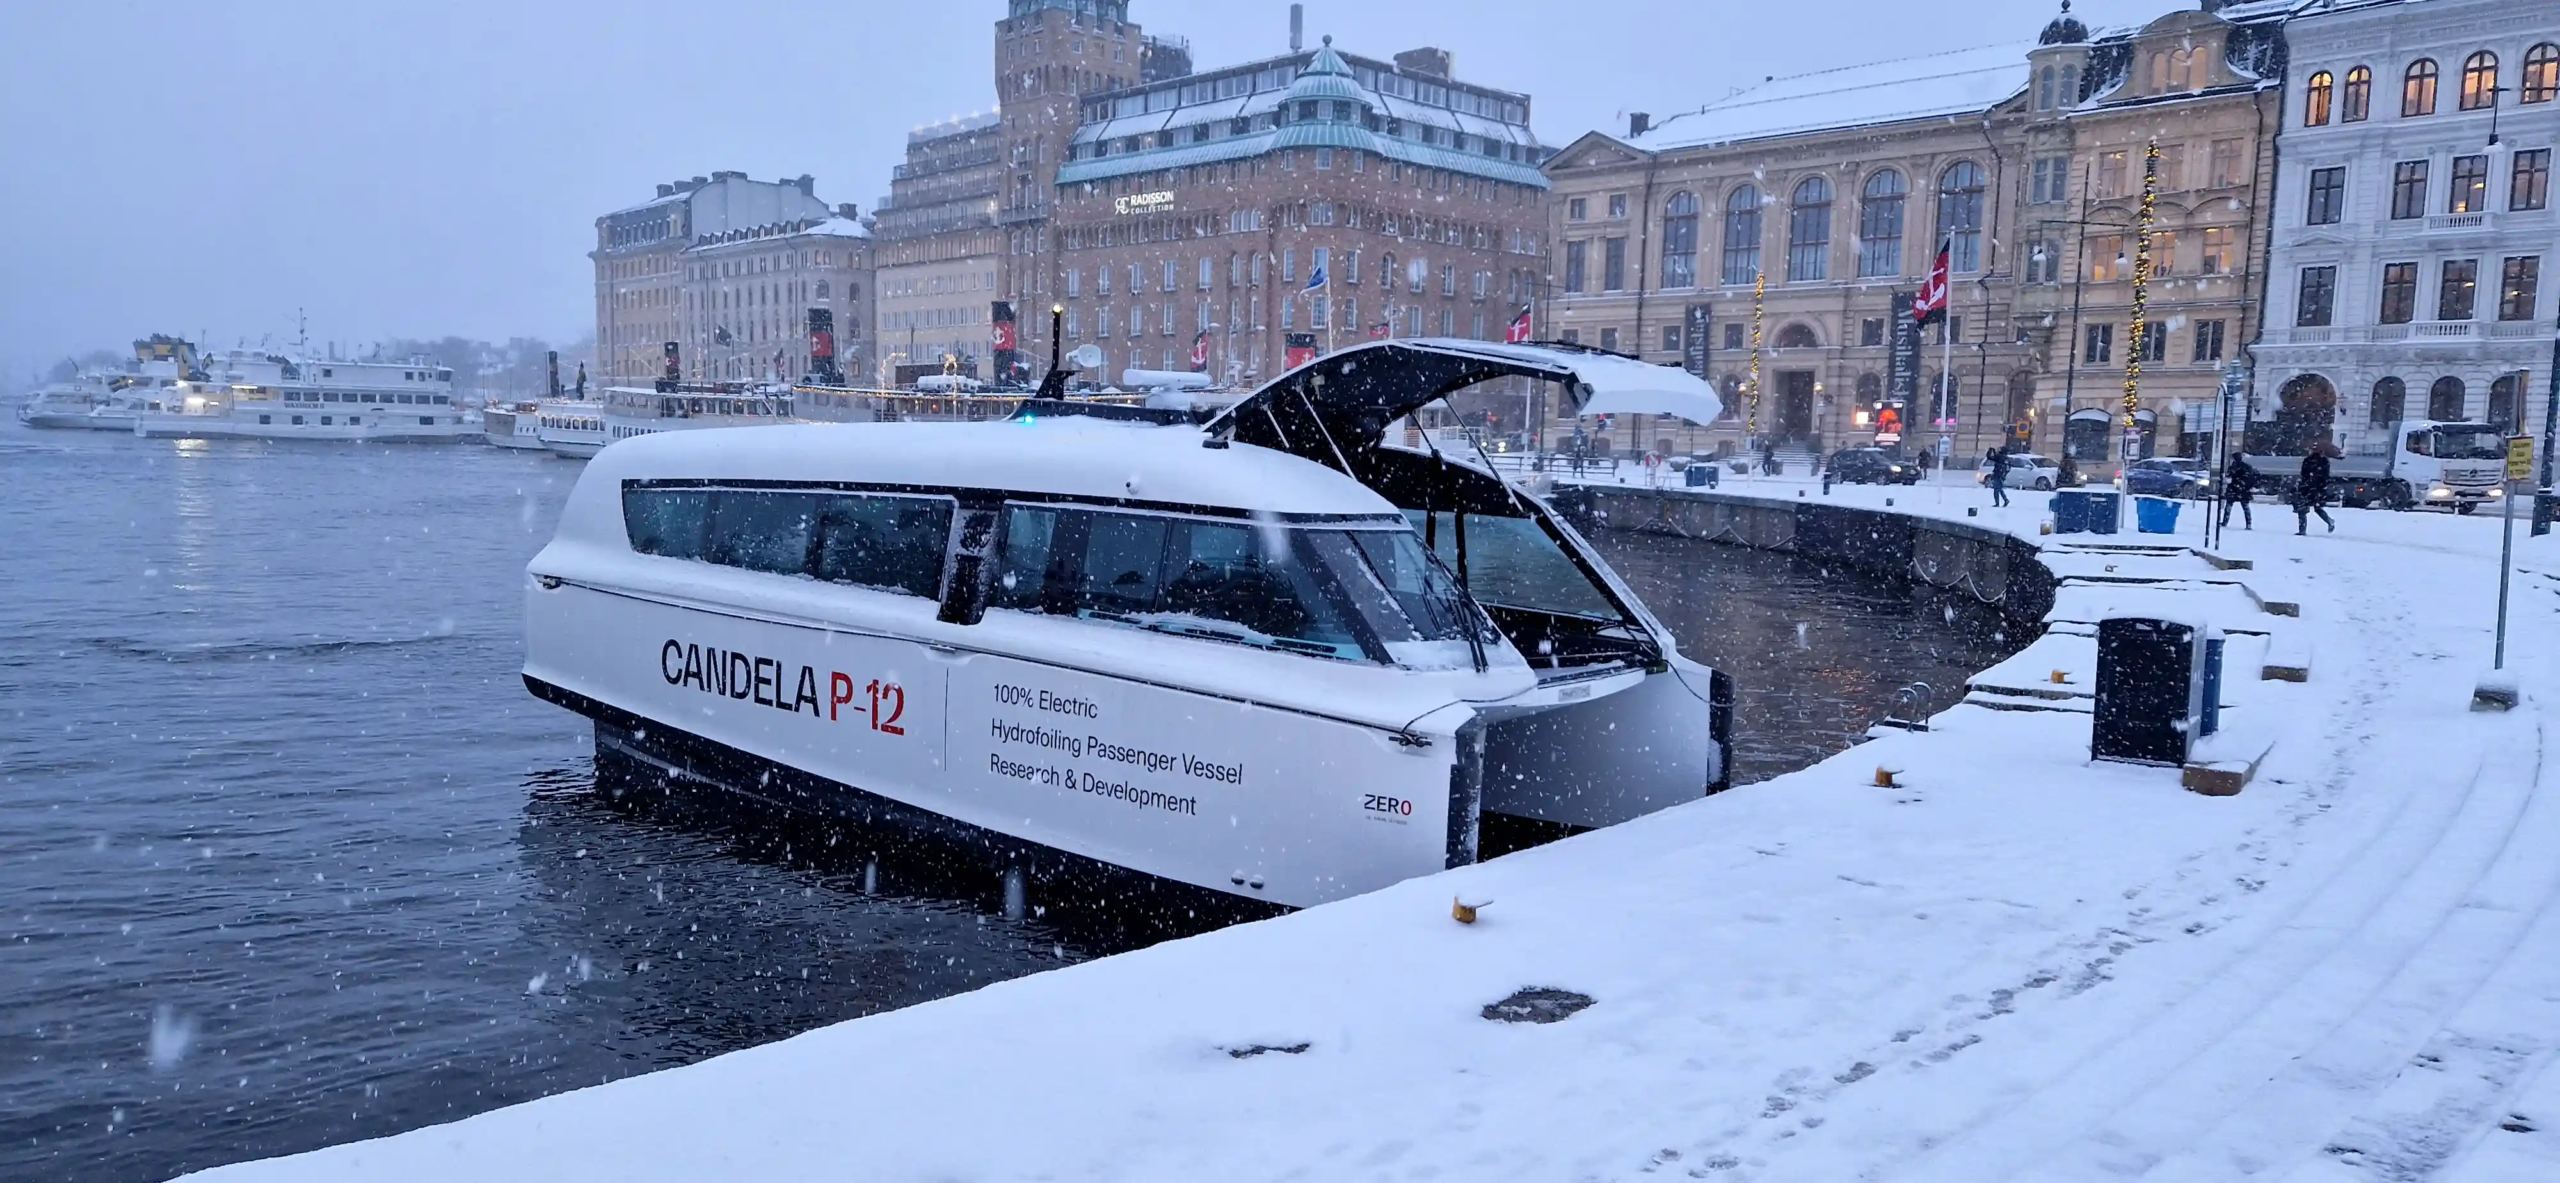 Candela P 12 Electric Boat in Cold Climate